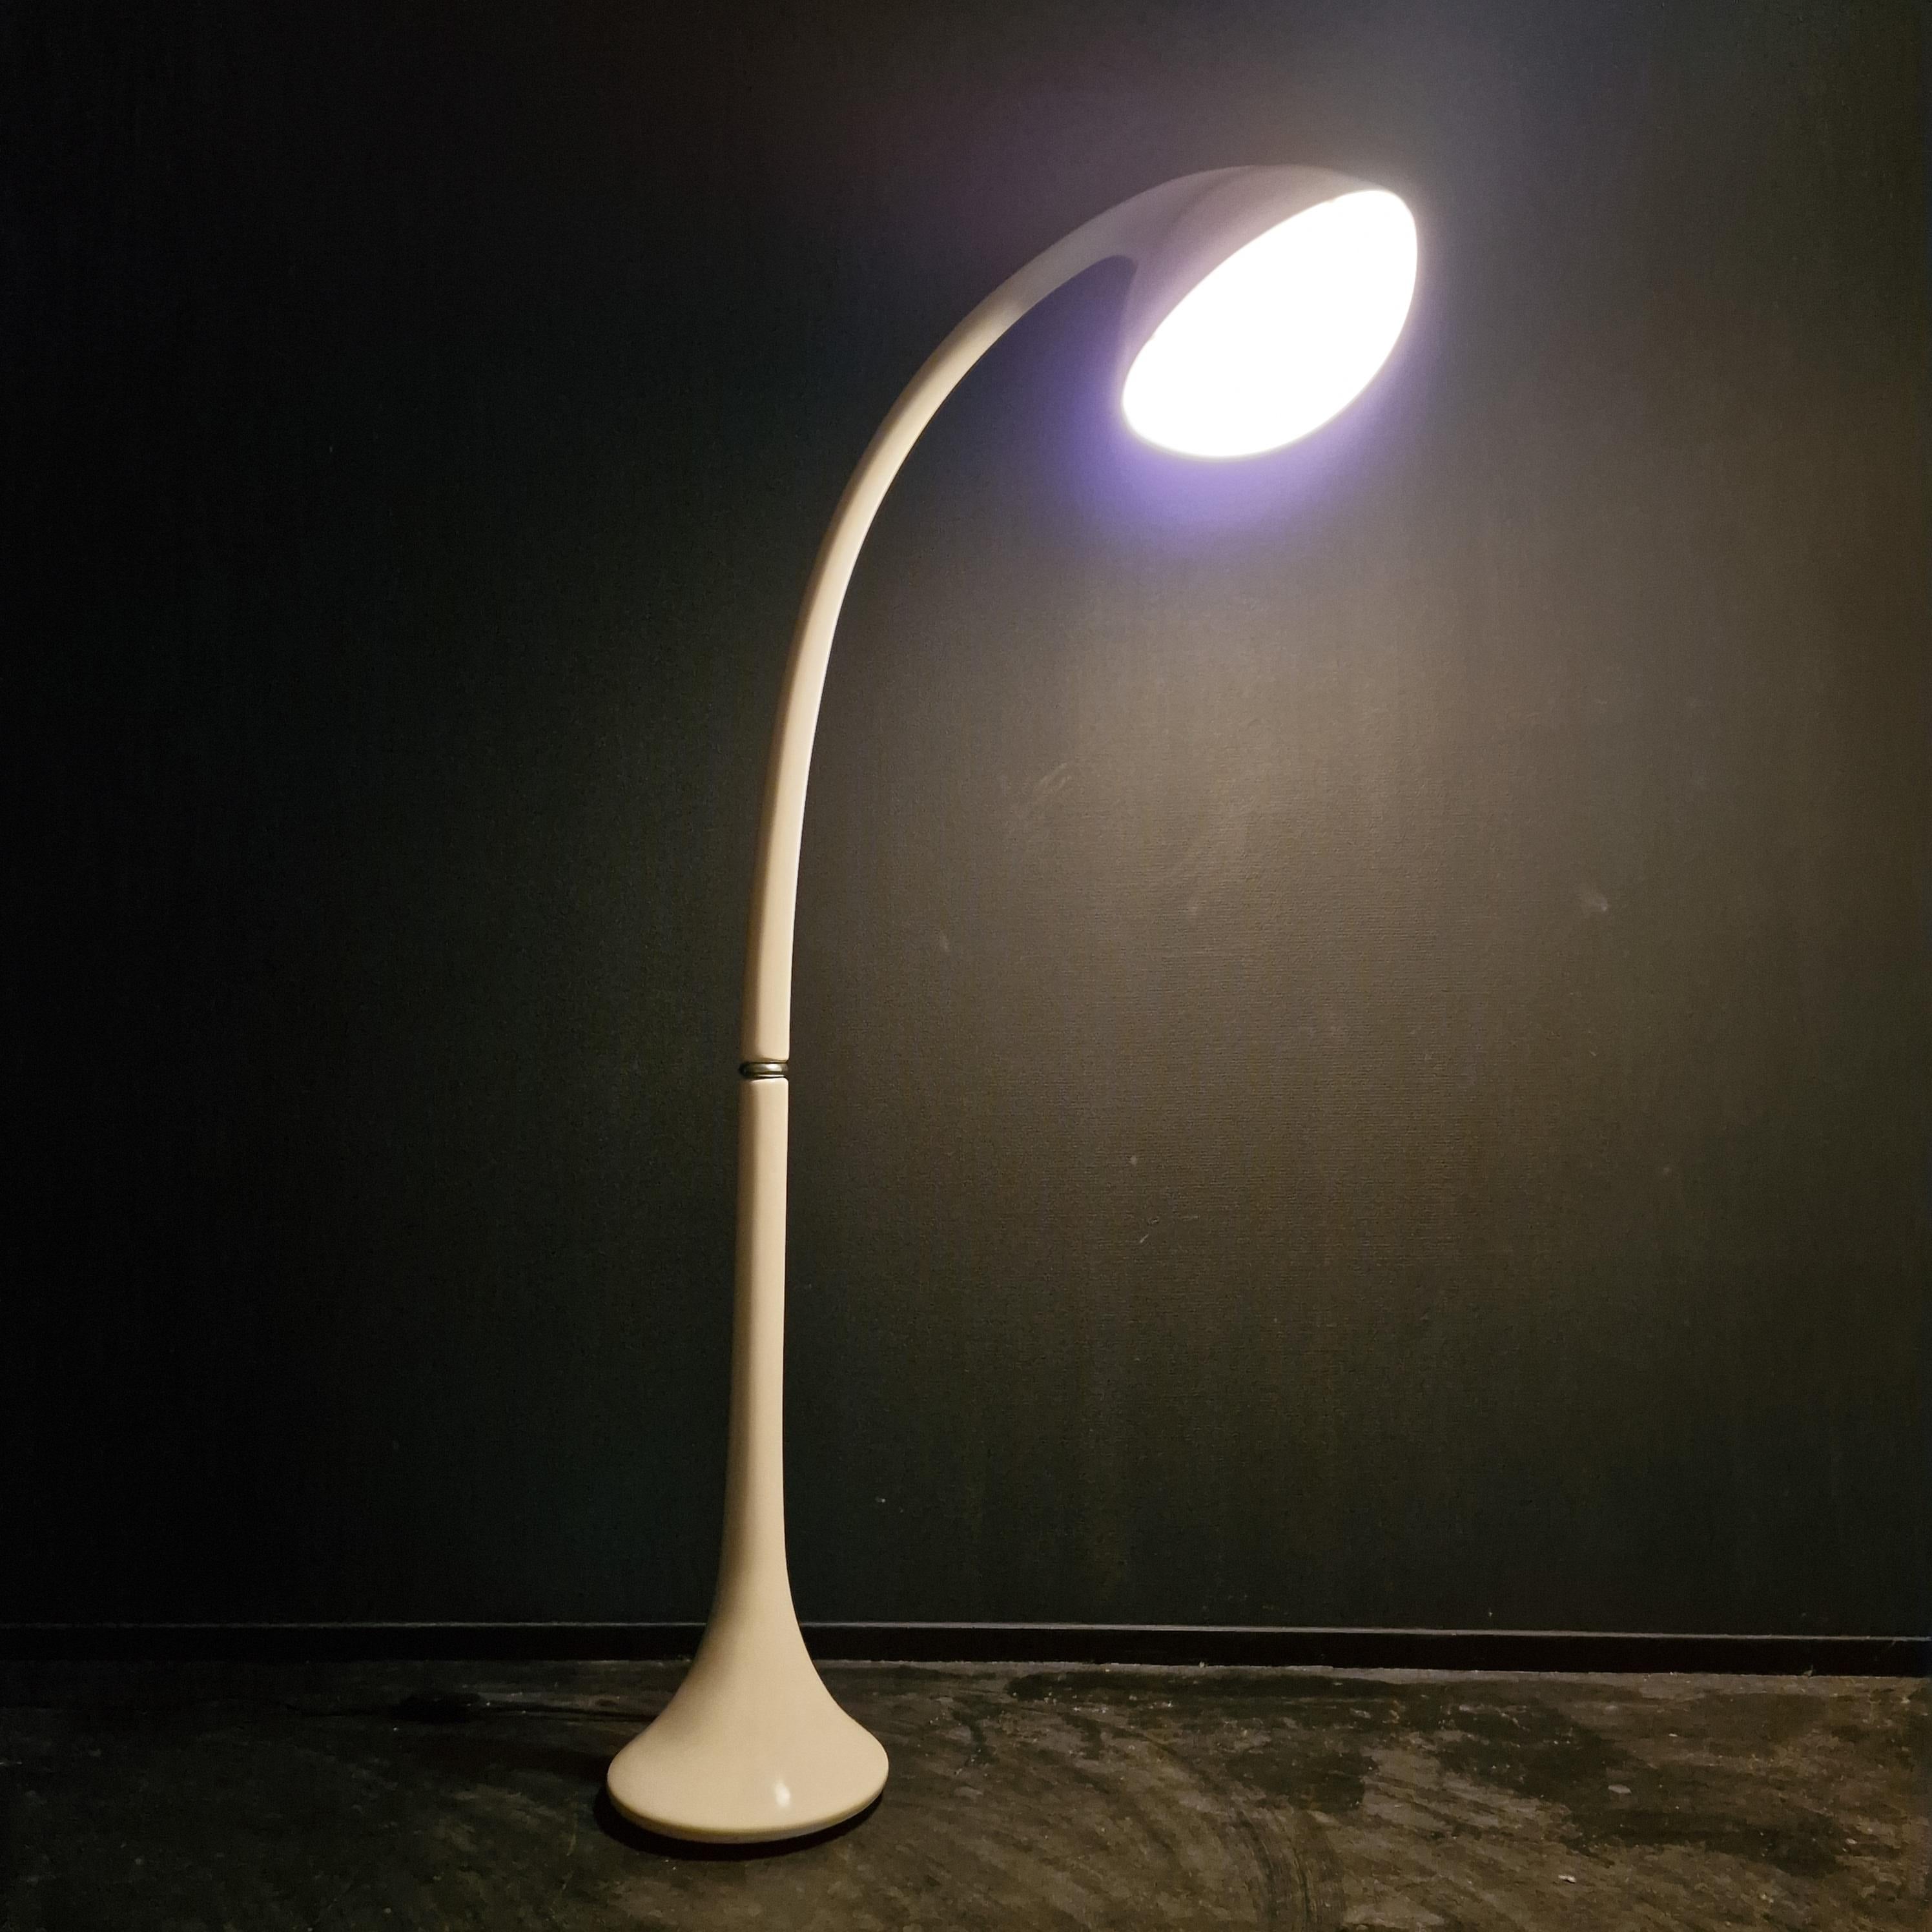 Beautiful and very large floor lamp by Fabio Lenci for iGuzzini, Italy 1968.

Fabio Lenci, an acclaimed designer renowned for his innovative lighting designs, conceived the 'Lampione' floor lamp, an outdoor lighting fixture that takes its name